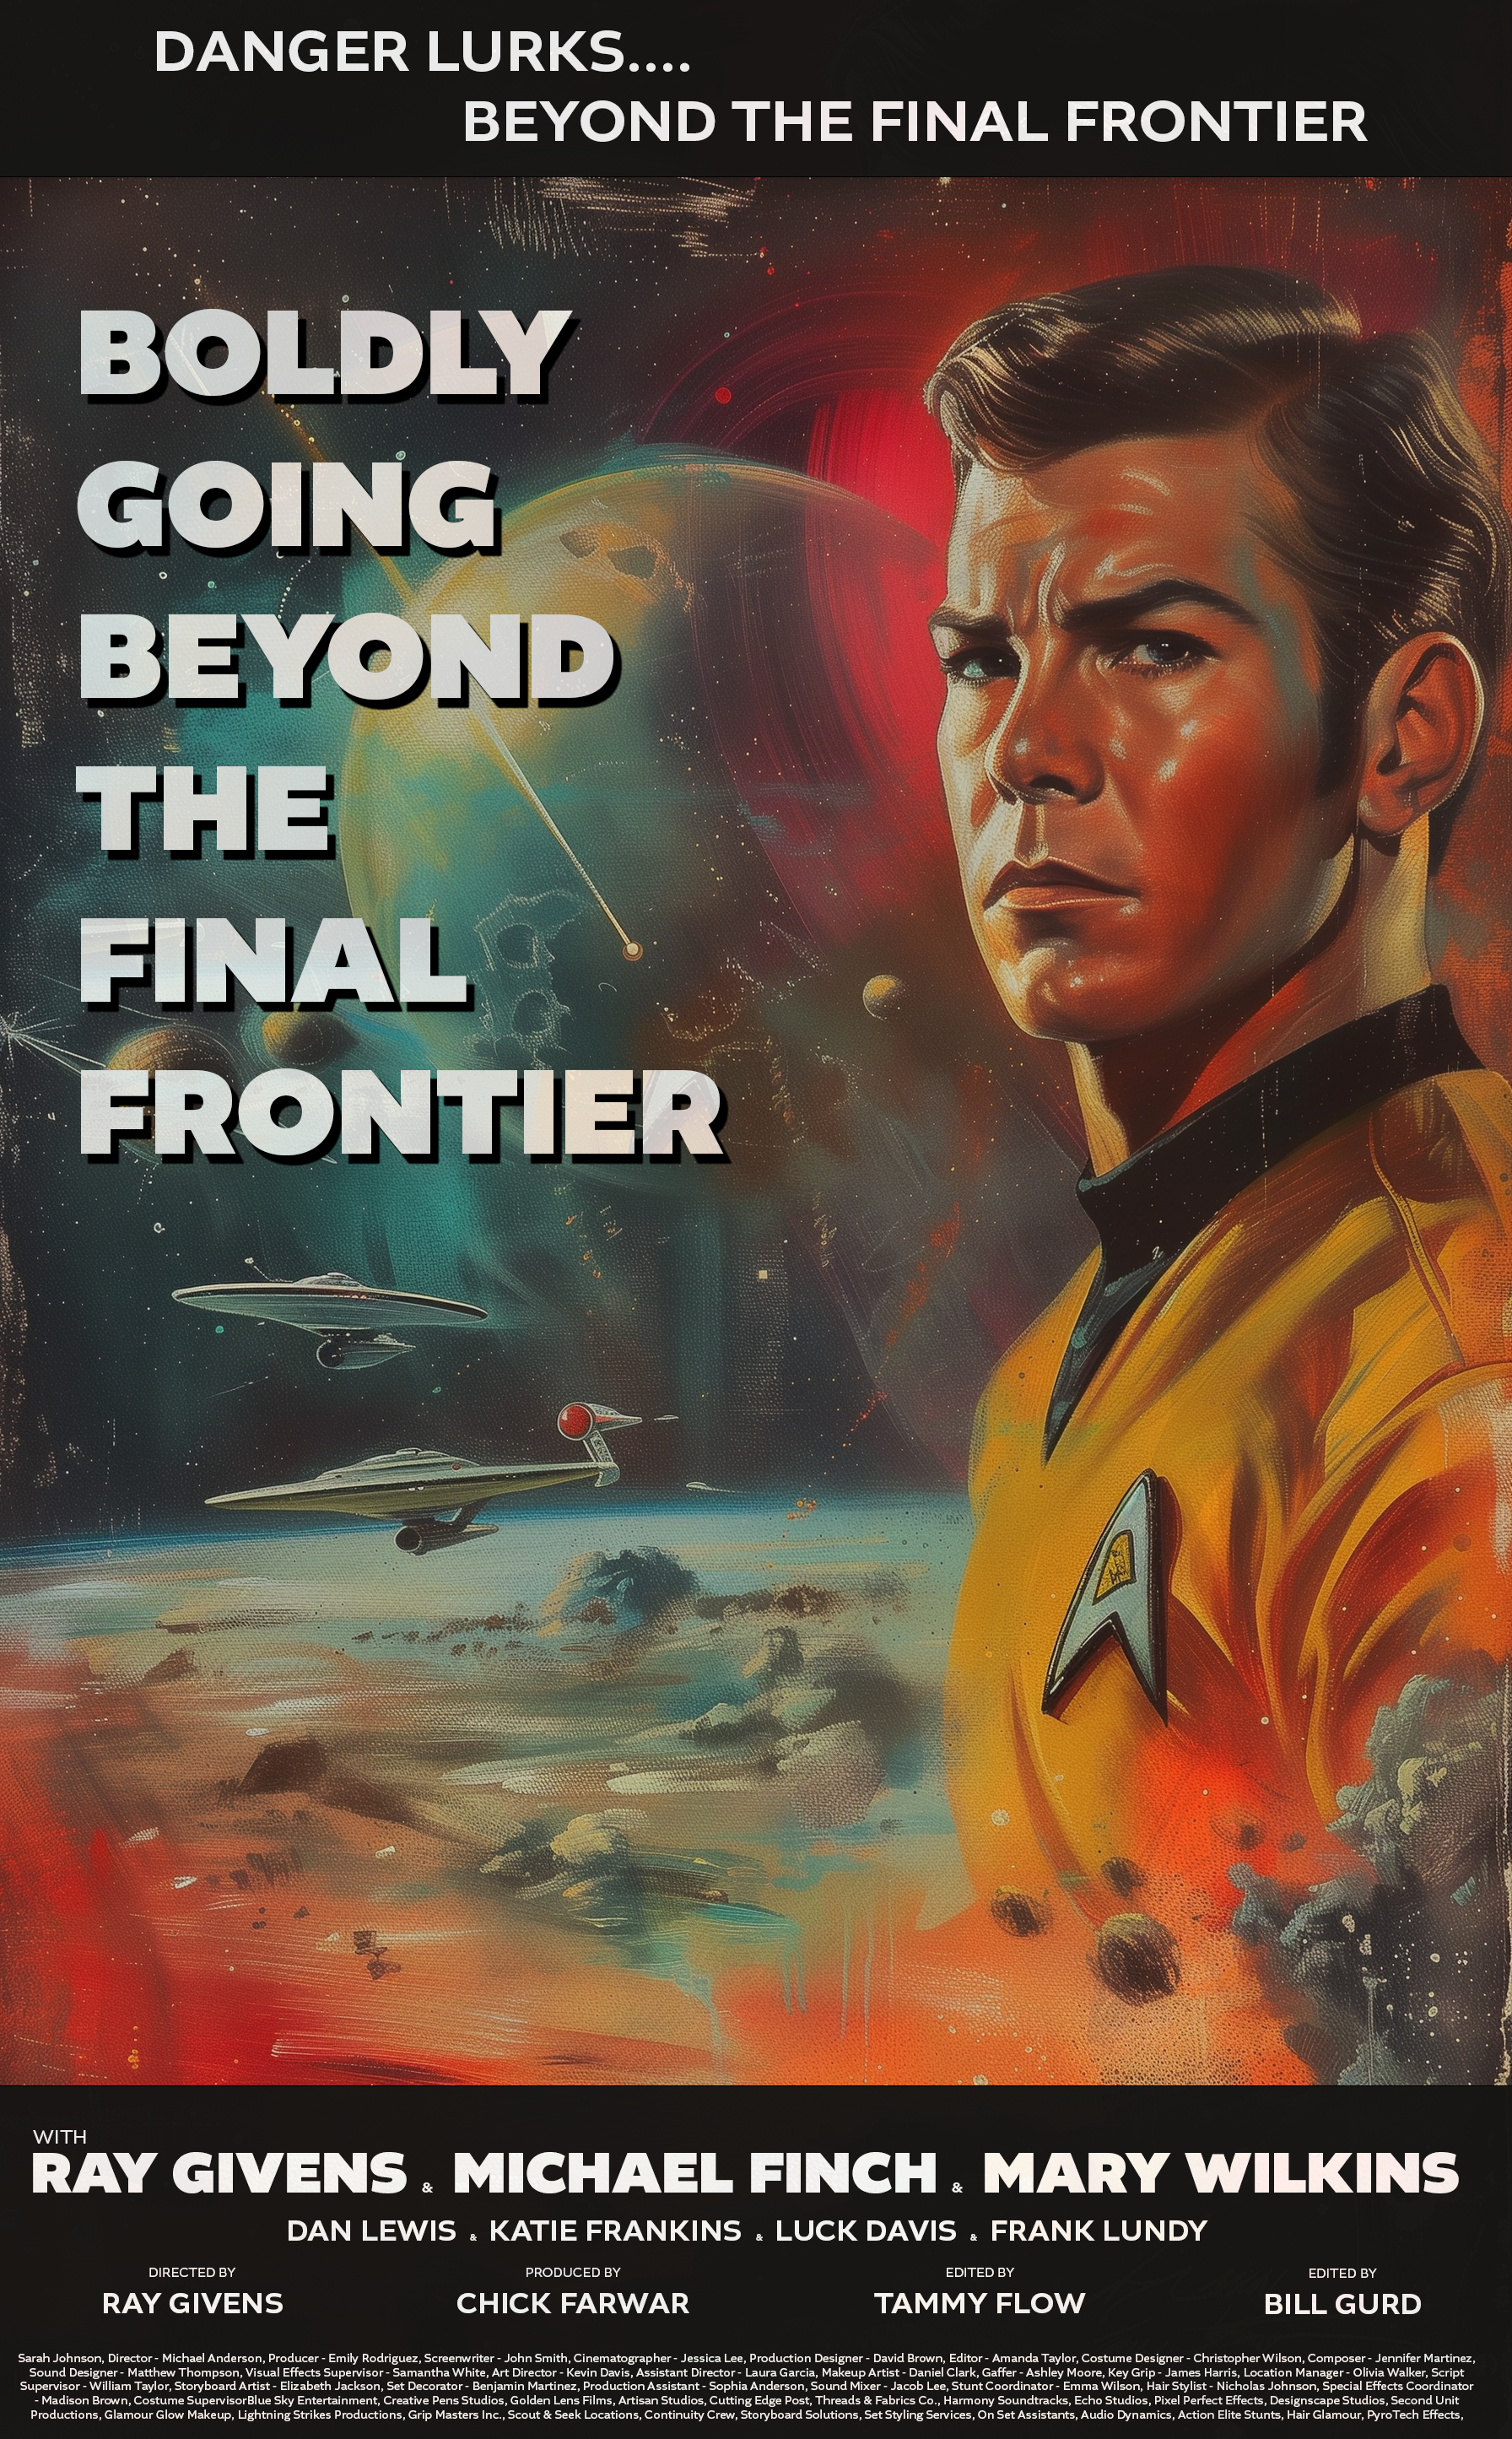 Name:  Beyond the Final Frontier.png
Views: 138
Size:  8.19 MB